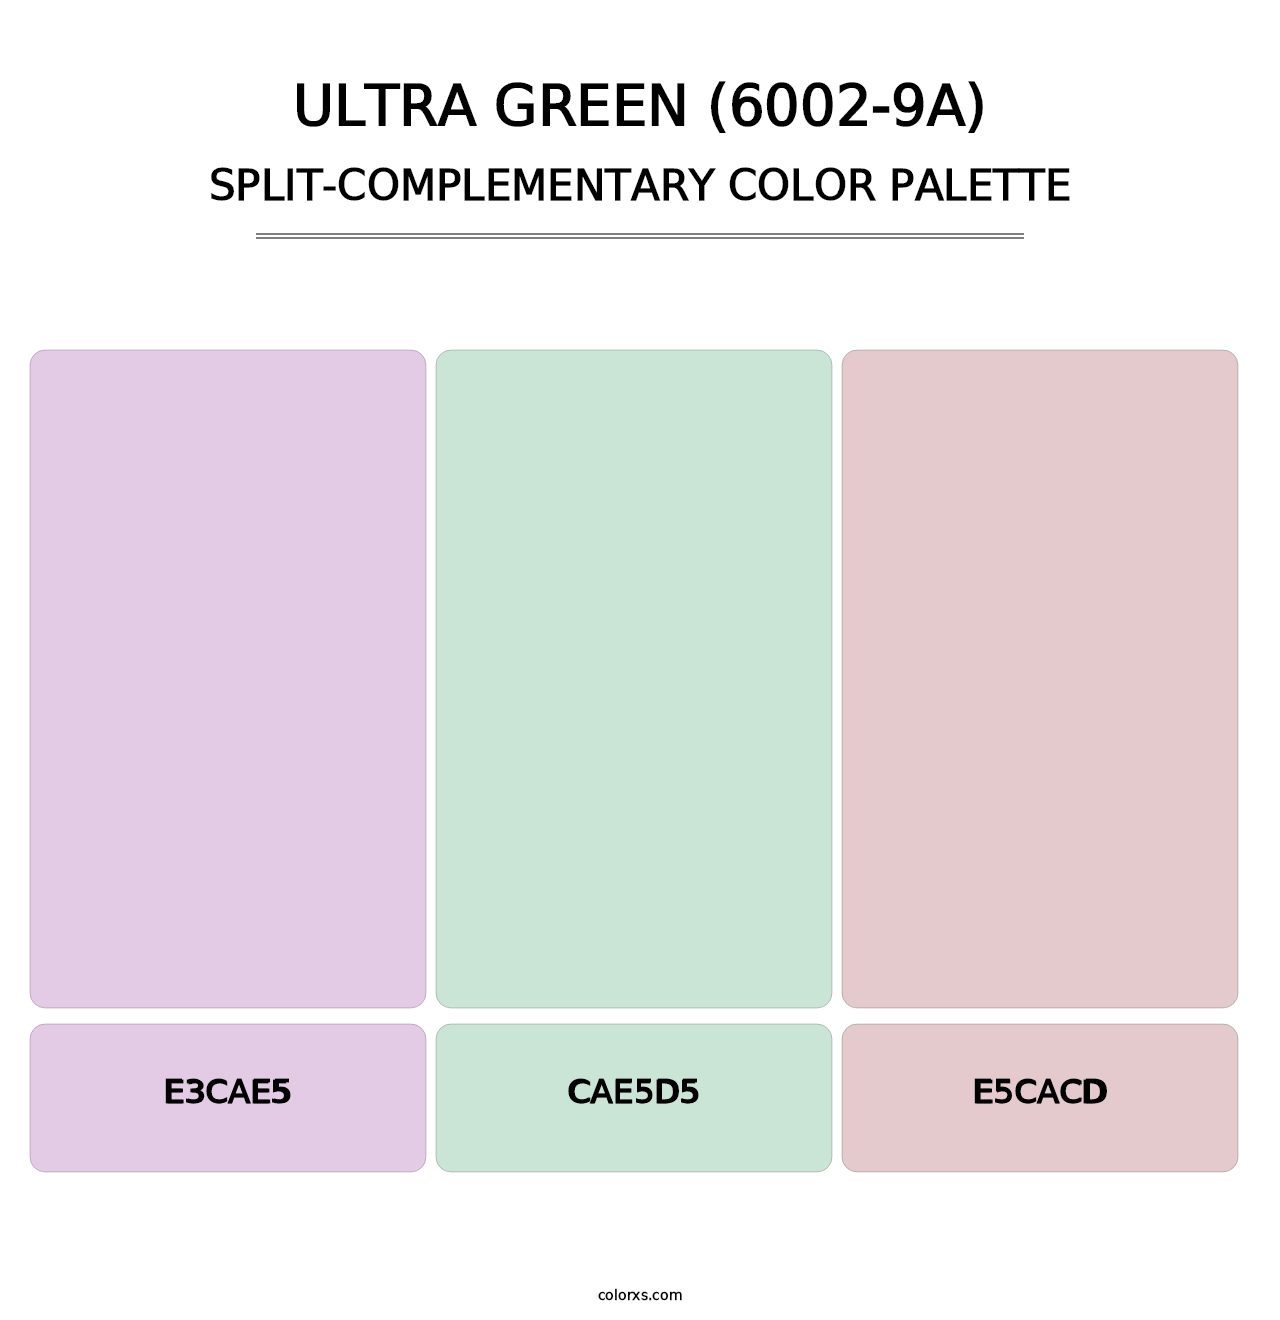 Ultra Green (6002-9A) - Split-Complementary Color Palette